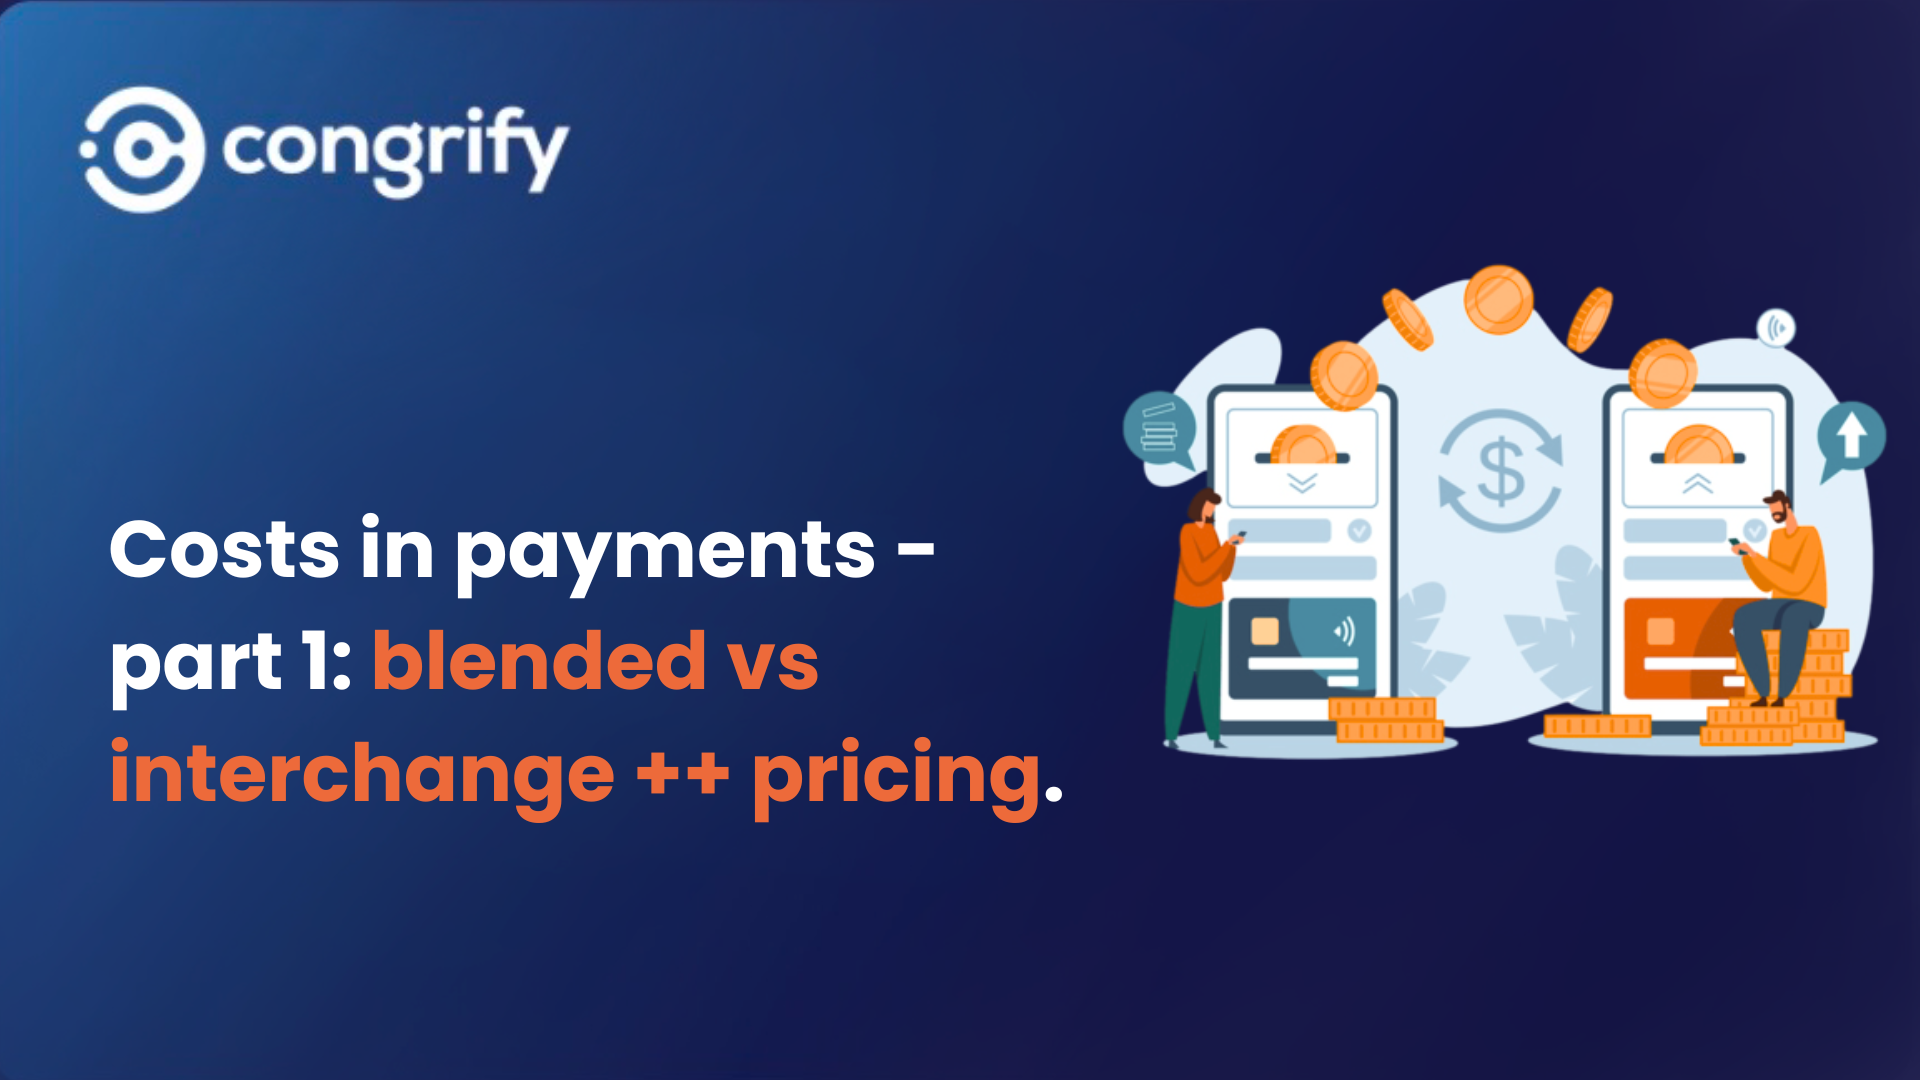 Learn about different pricing models and costs in in payments with congrify